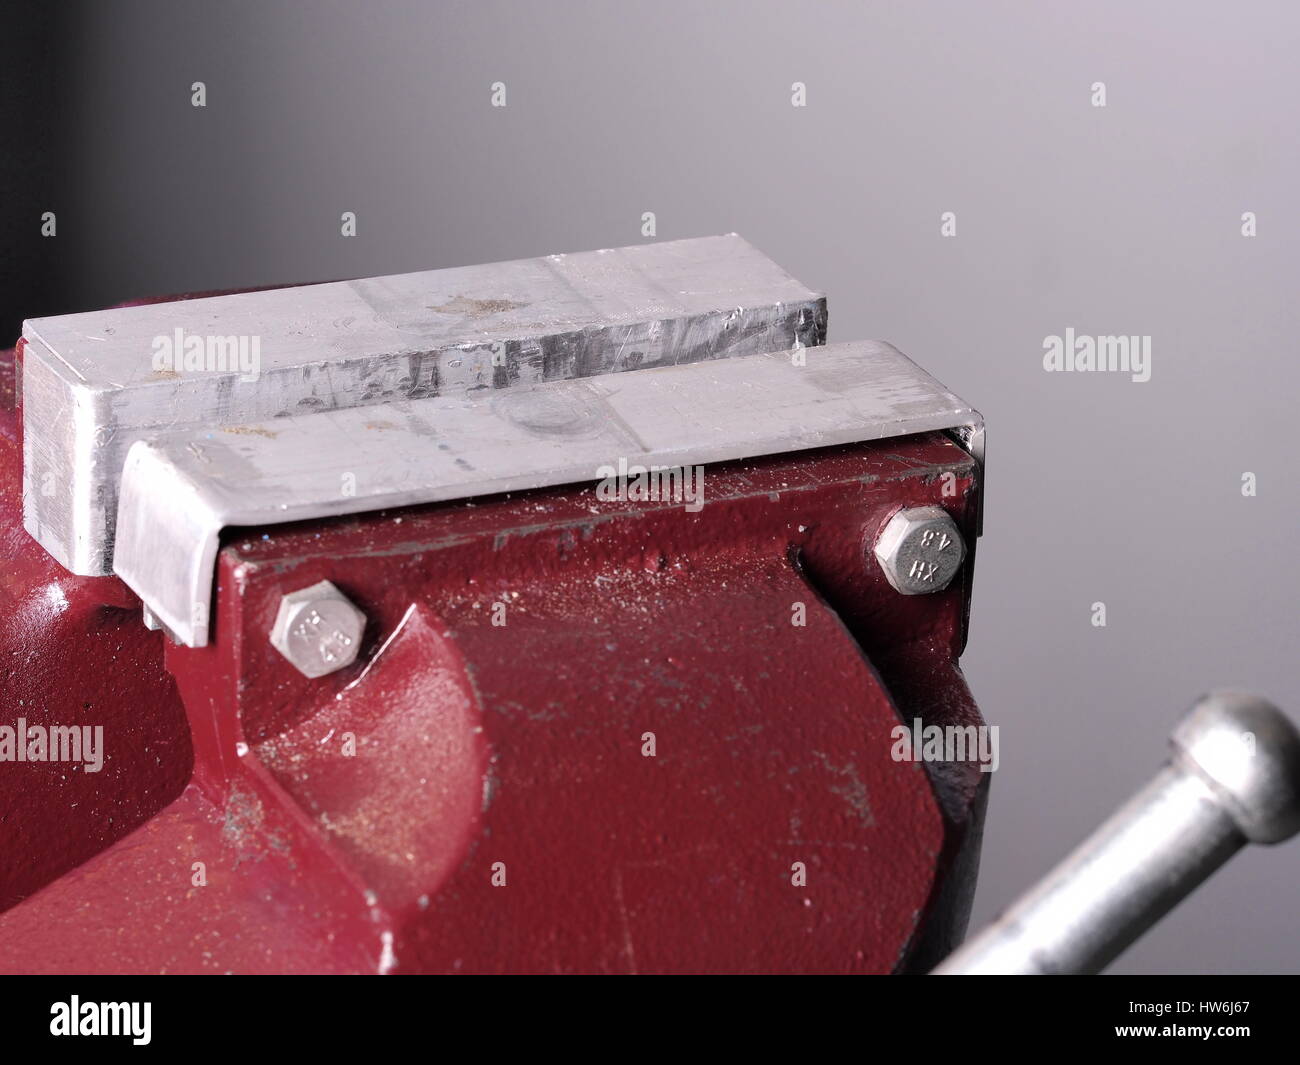 Industrial vice with soft metal grip plates, Australia 2015 Industrial vice with soft metal grip plates, Australia 2015 Stock Photo